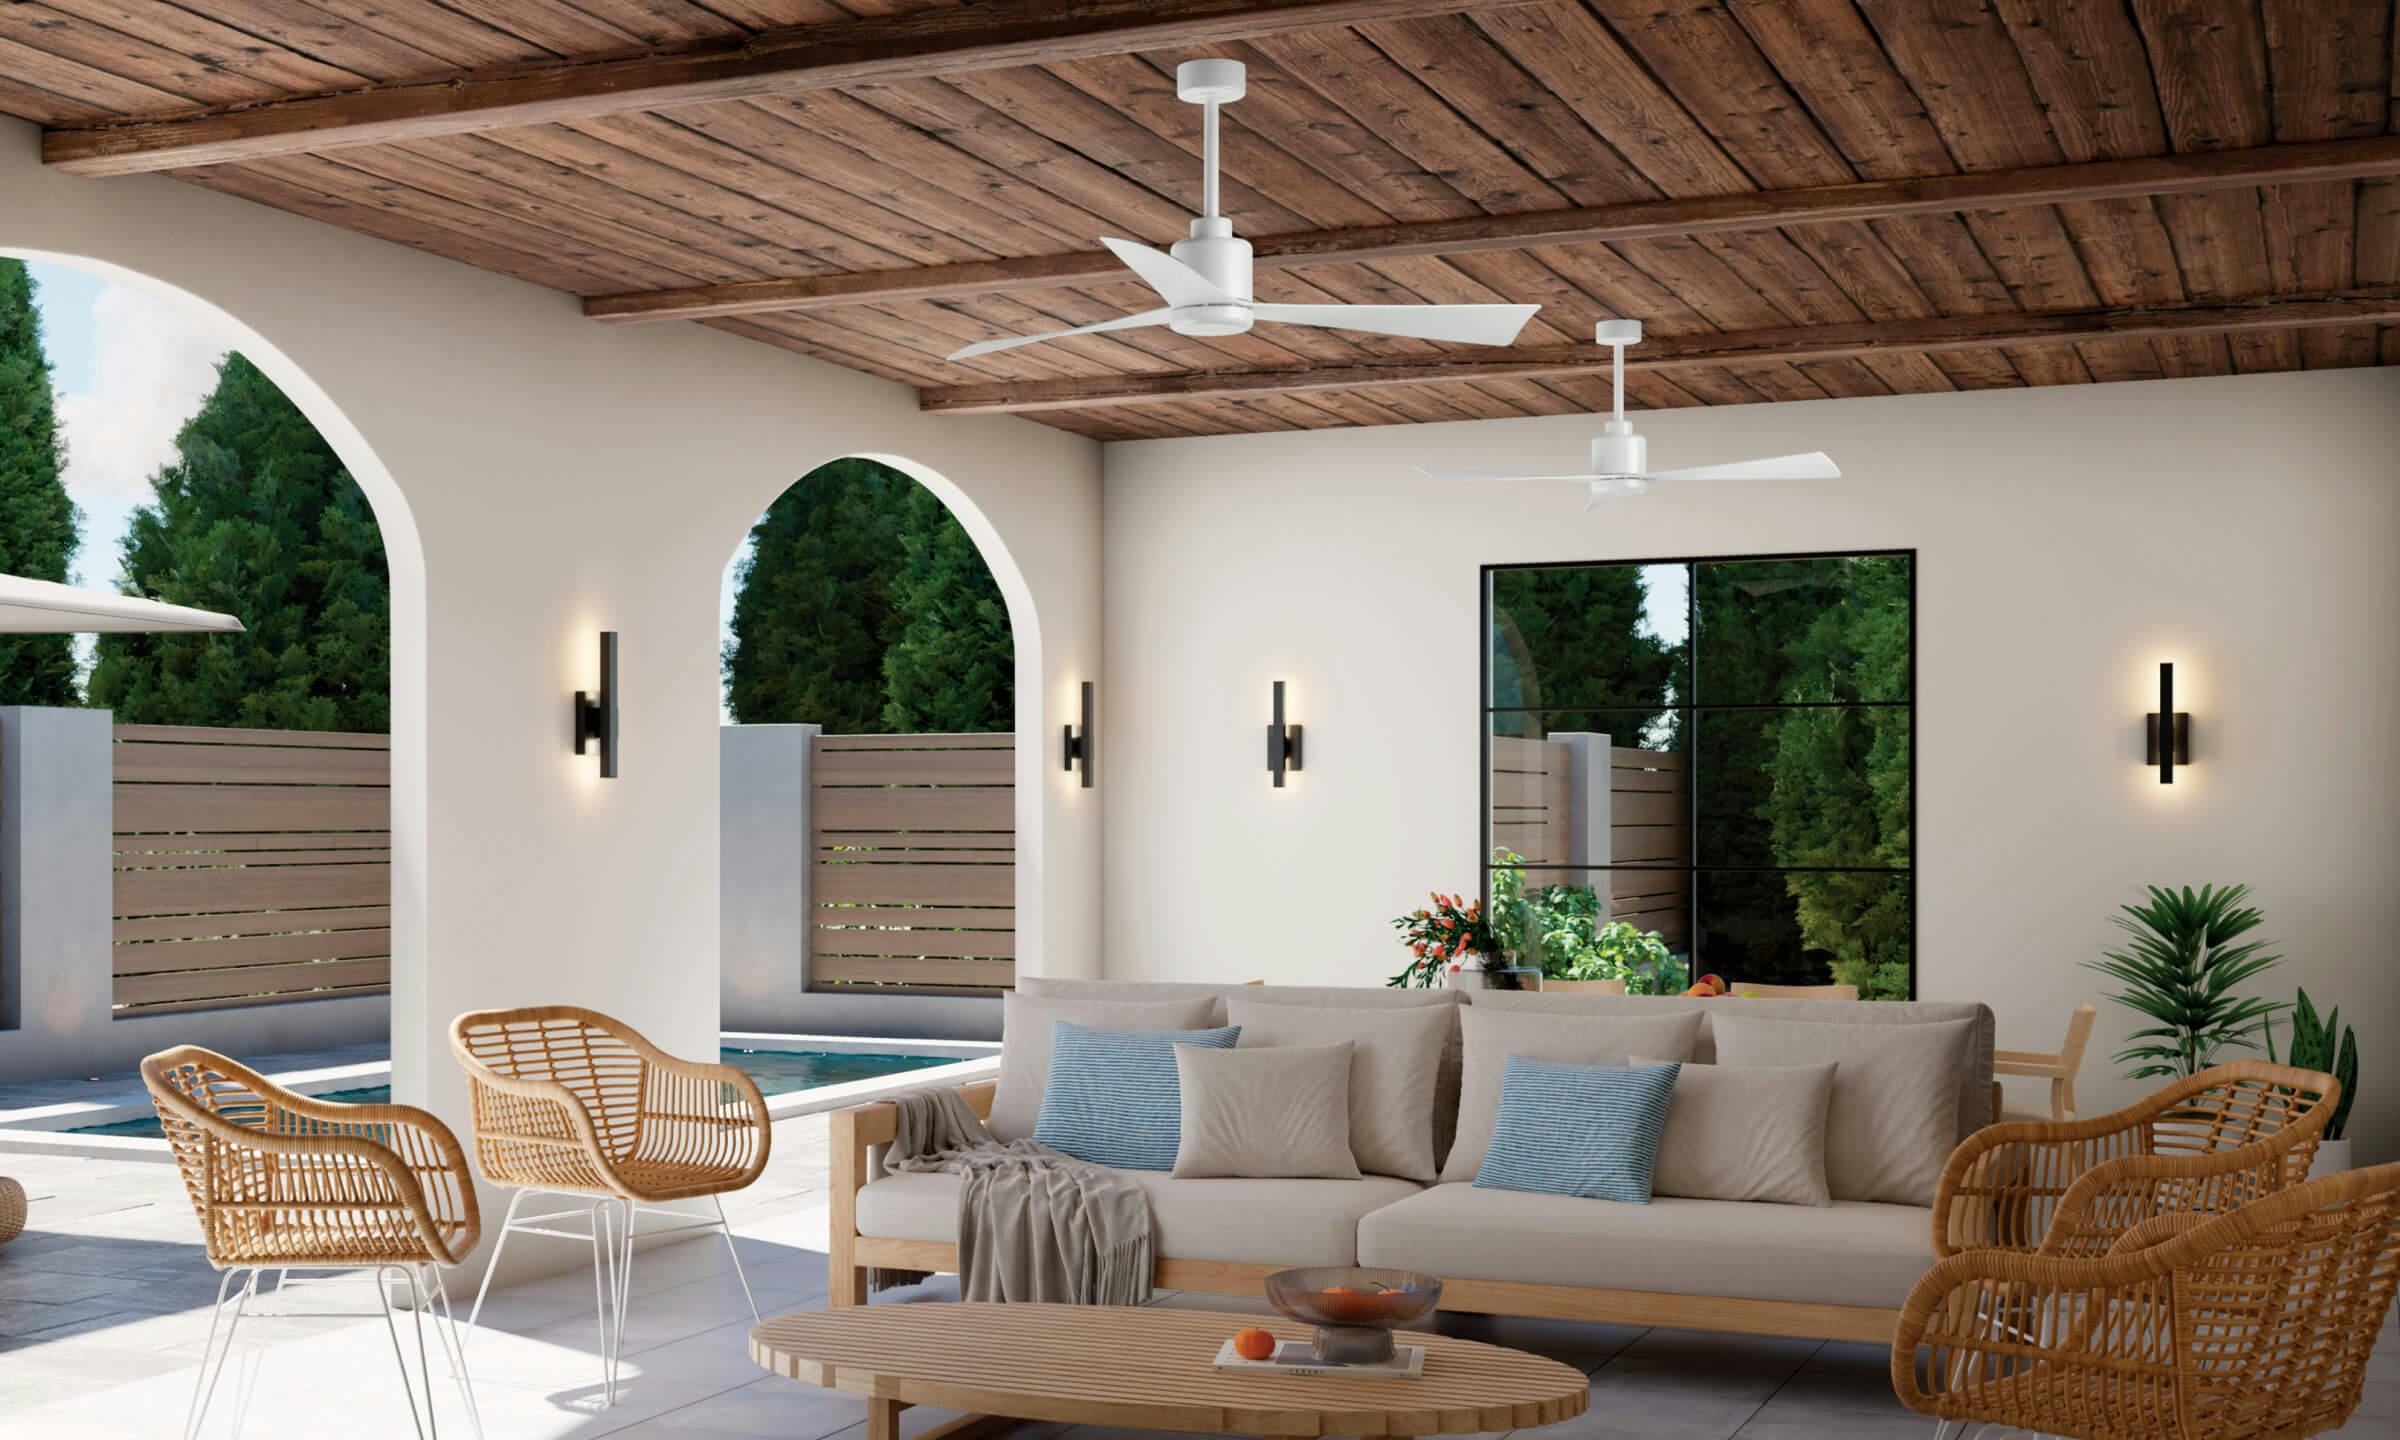 Day lit porch with two True ceiling fans and four illuminated sconces wrapped around the walls